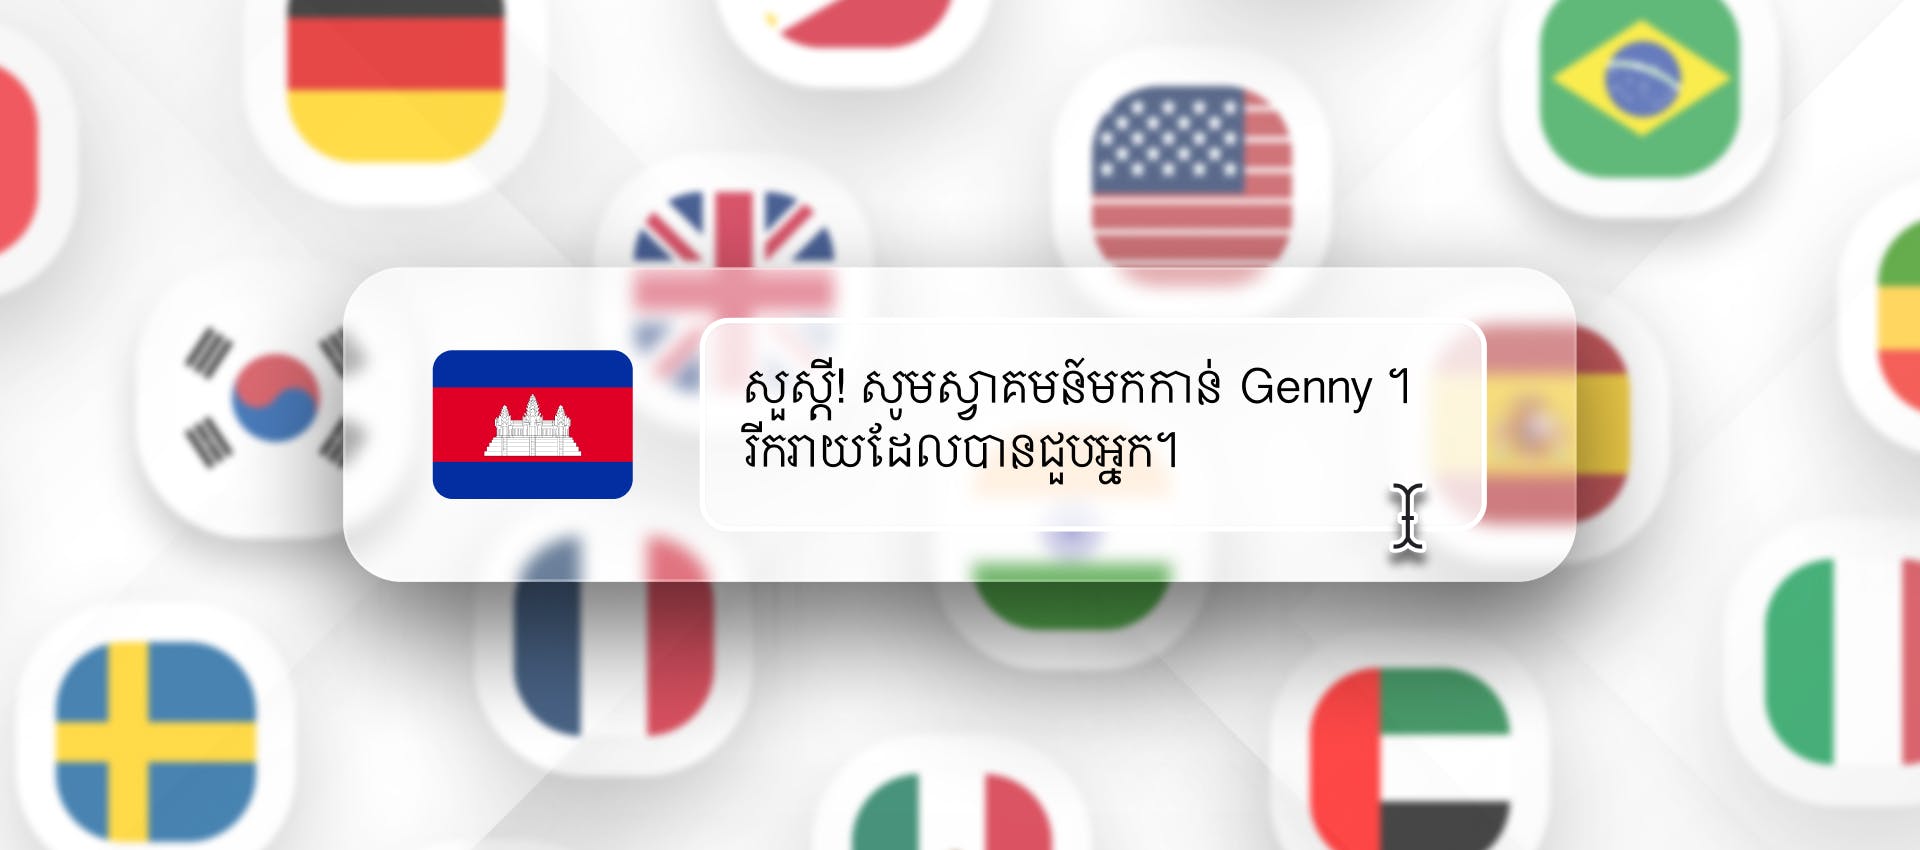 Khmer phrase for Khmer TTS generation with different flags in the background